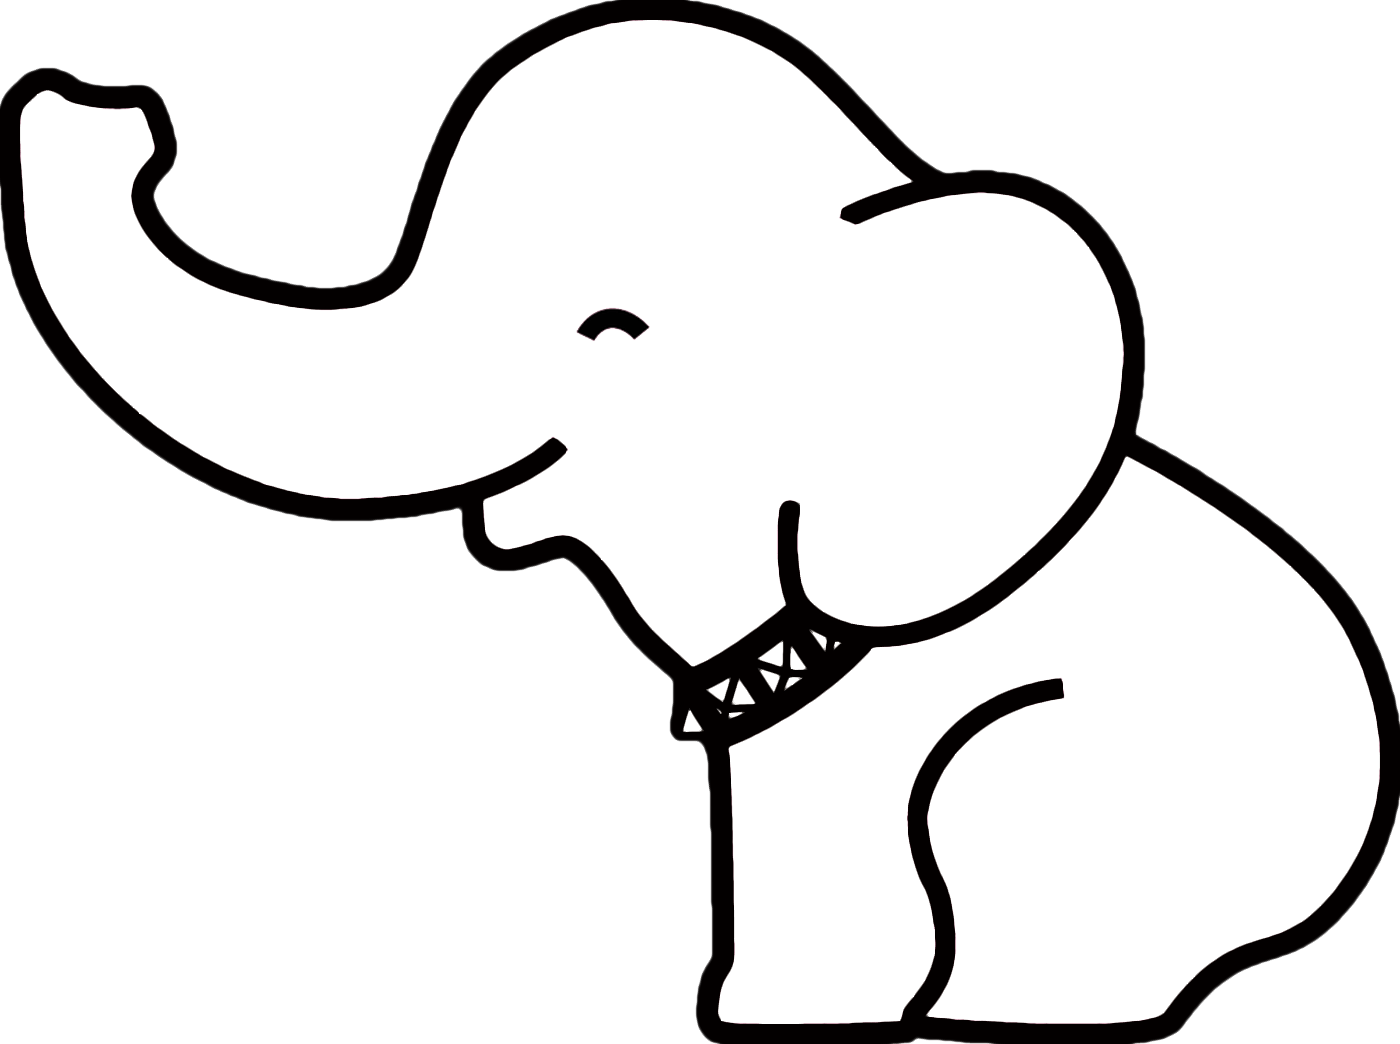 White Elephant Png Image - Elephant Outline, Transparent background PNG HD thumbnail